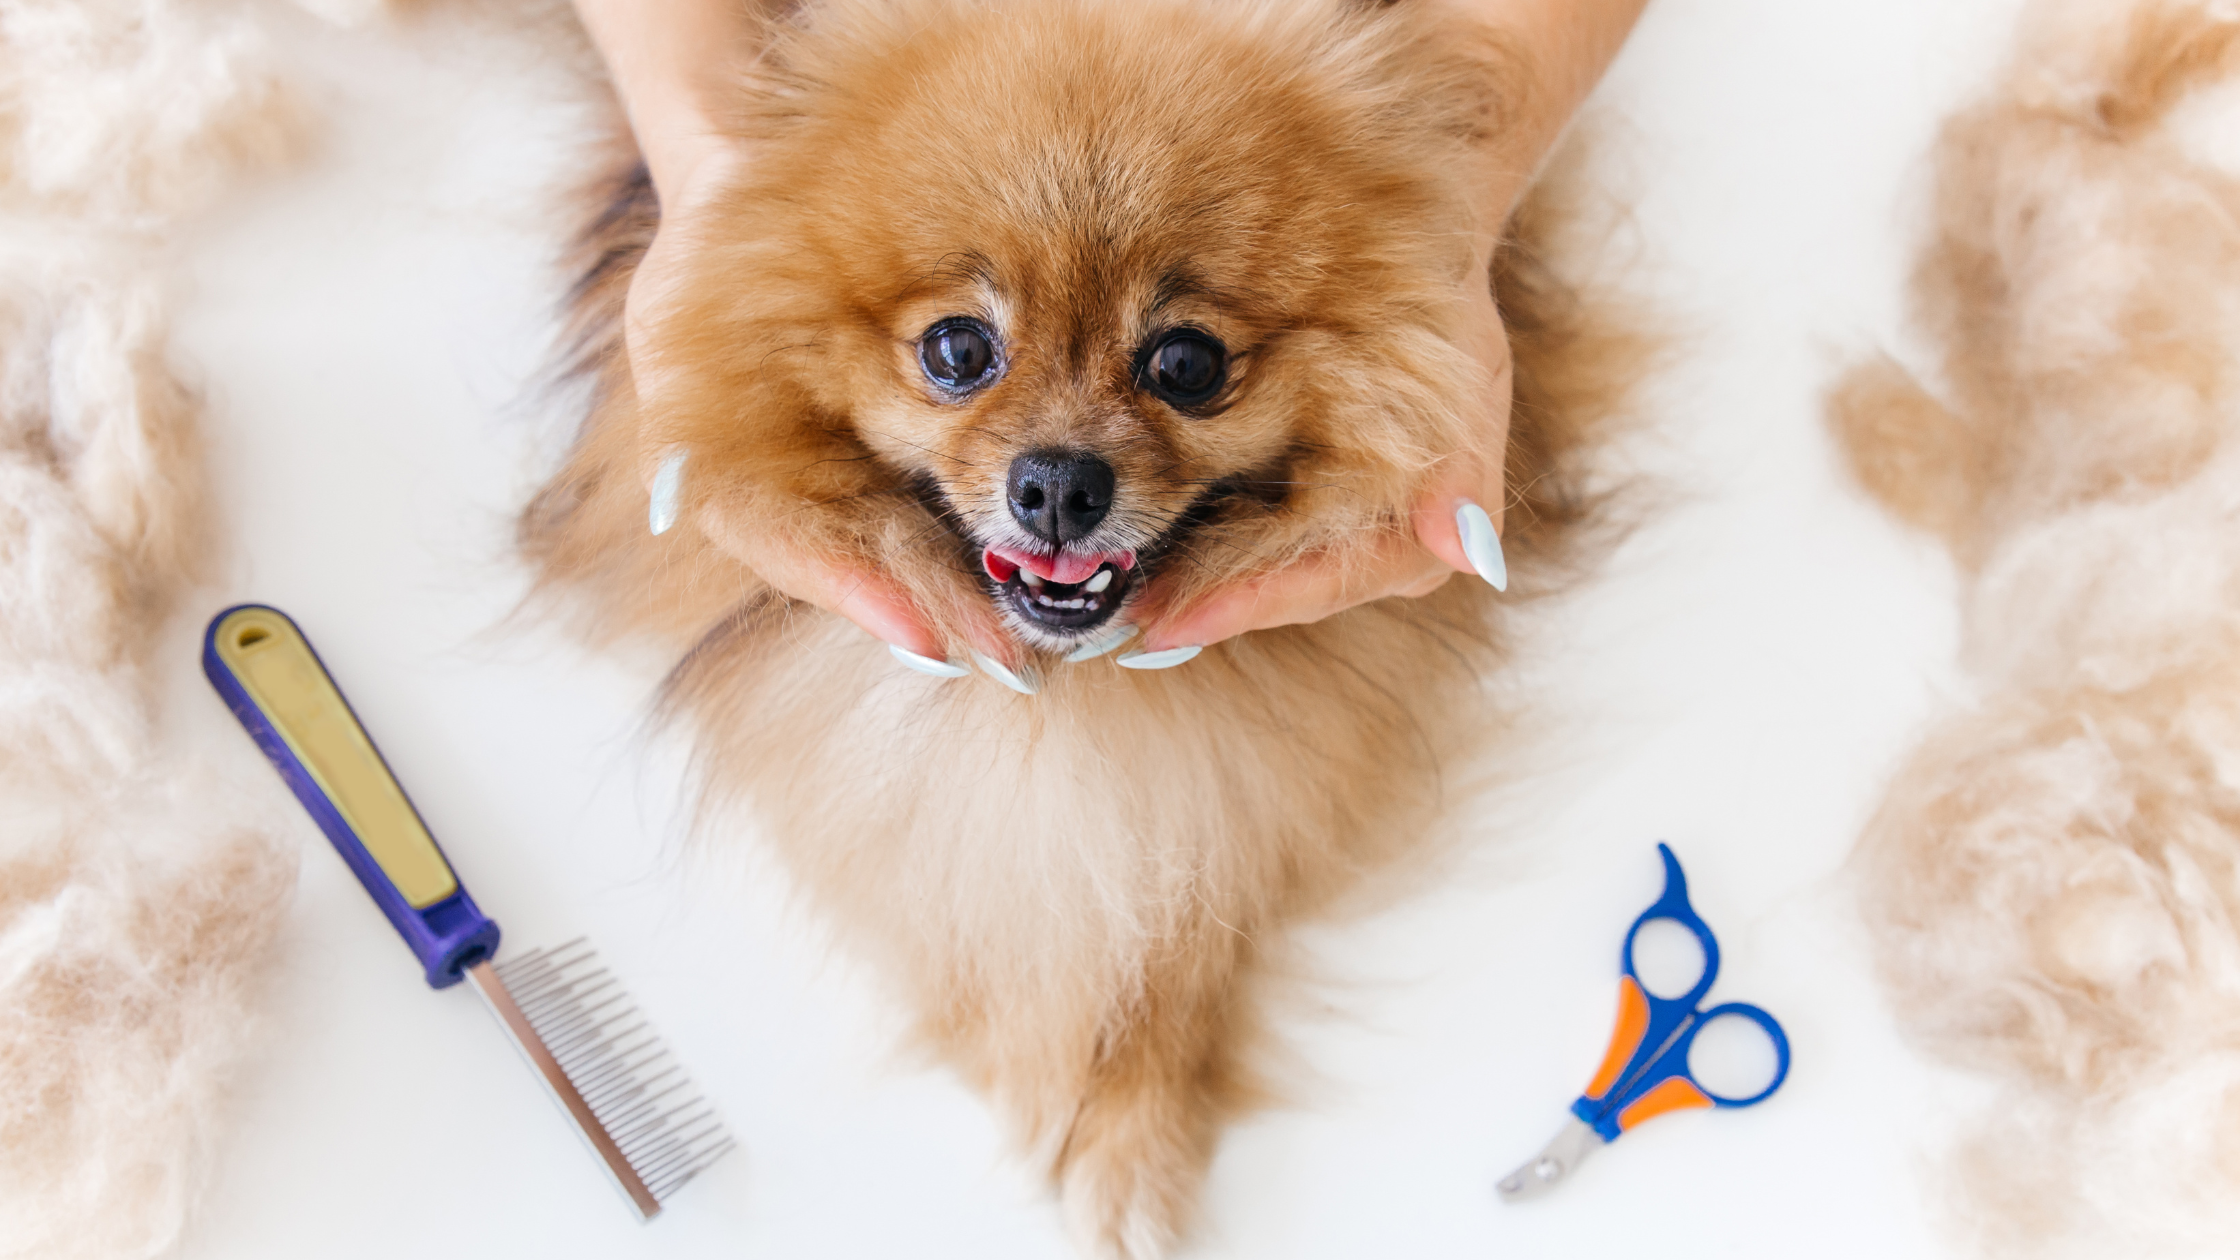 Top 10 Dog Grooming Tools Every Pet Owner Should Invest In